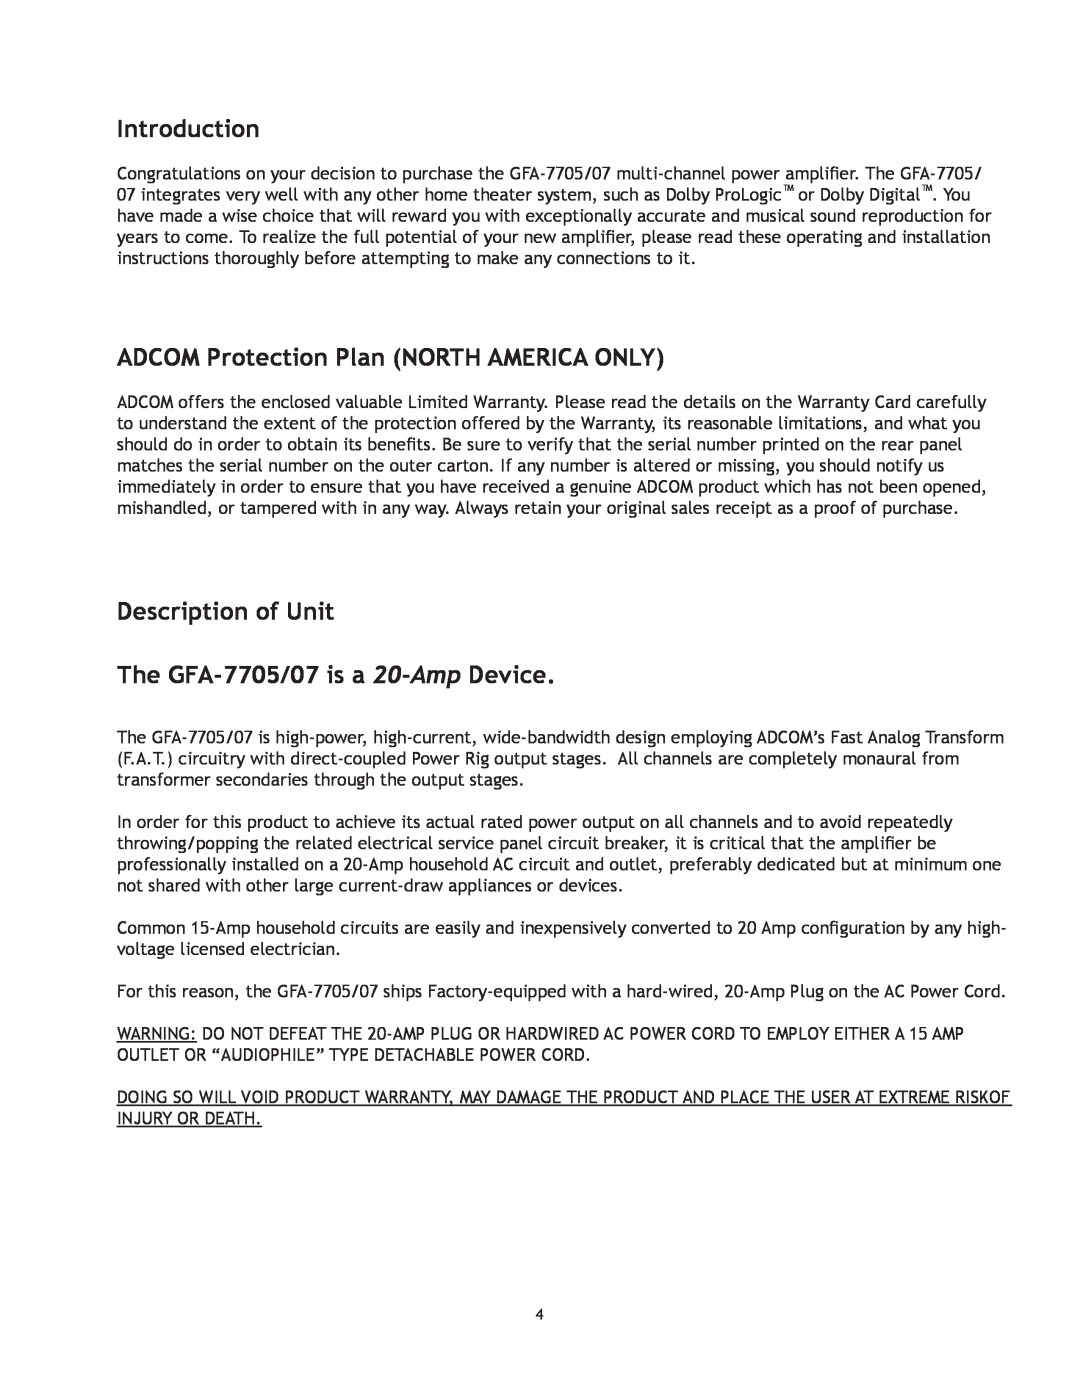 Adcom Introduction, ADCOM Protection Plan NORTH AMERICA ONLY, Description of Unit, The GFA-7705/07is a 20-Amp Device 